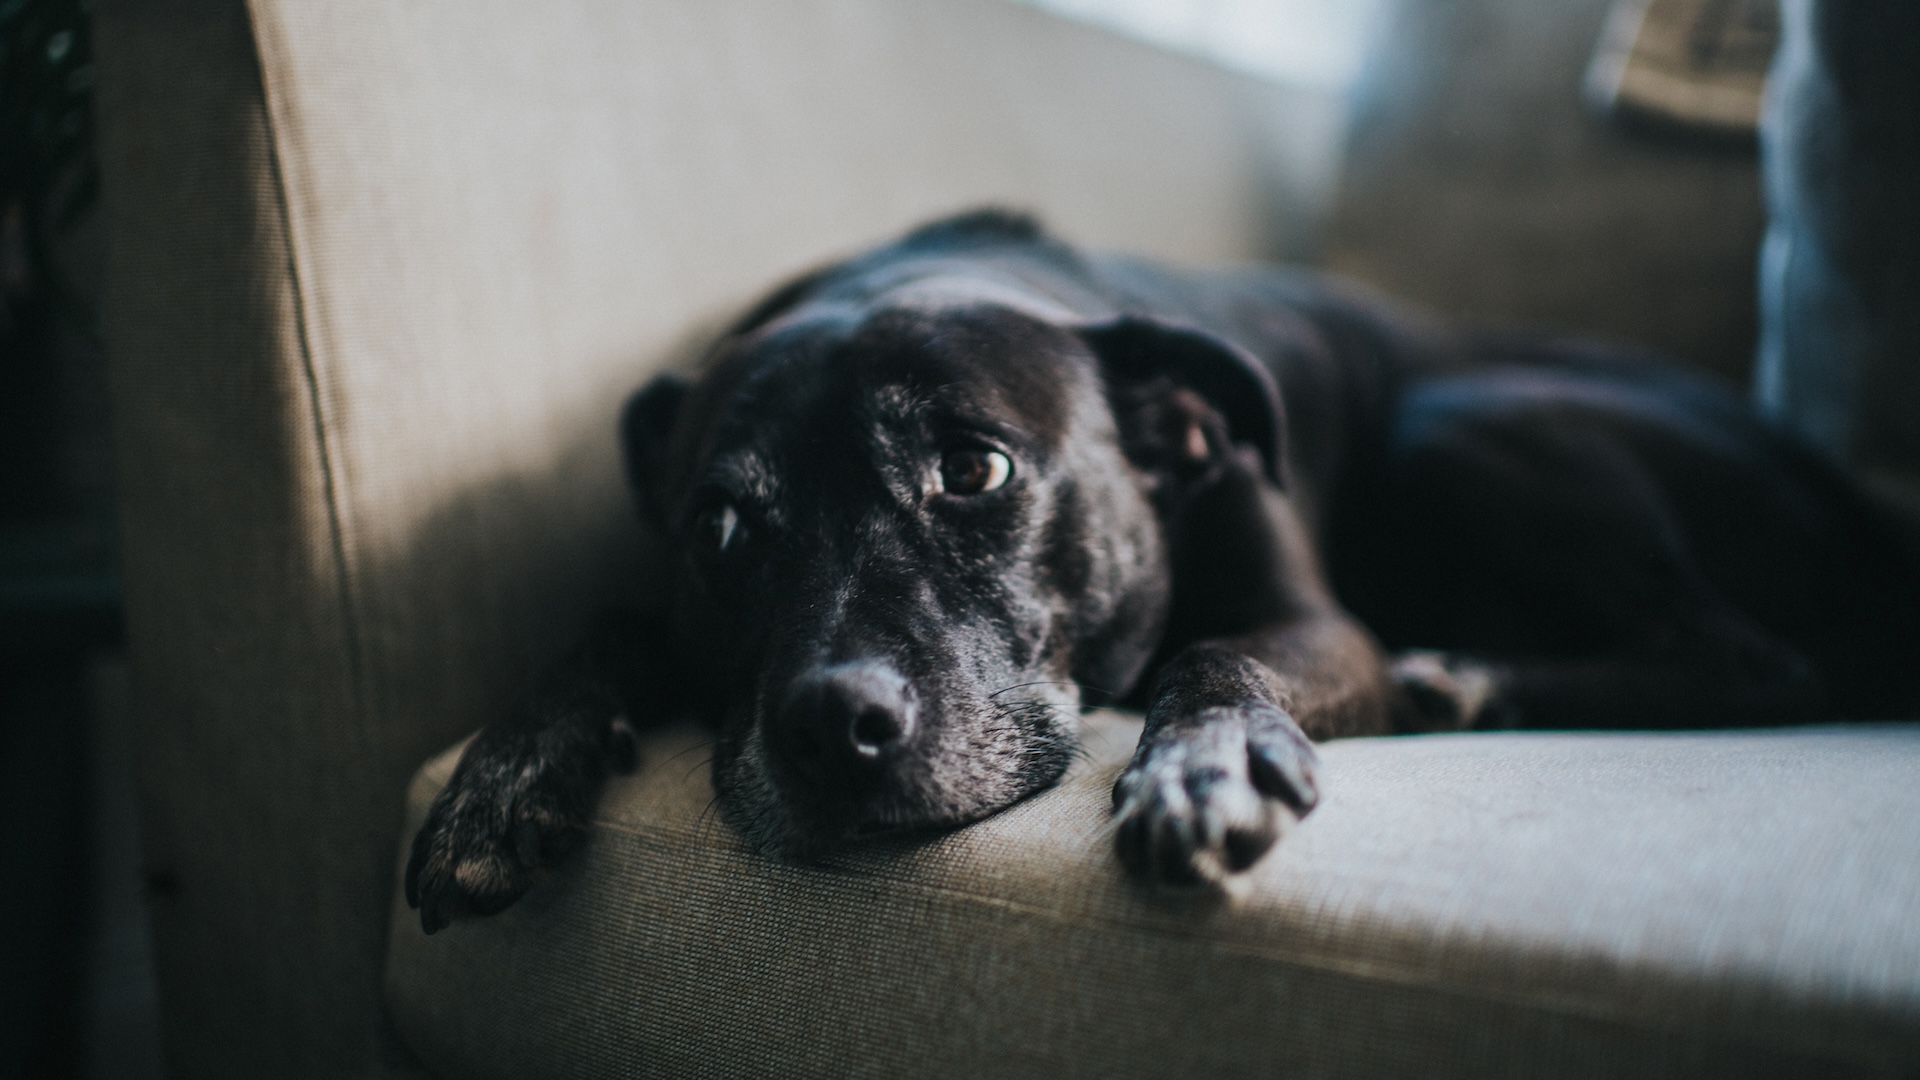  Dogs can smell their humans' stress, and it makes them sad 